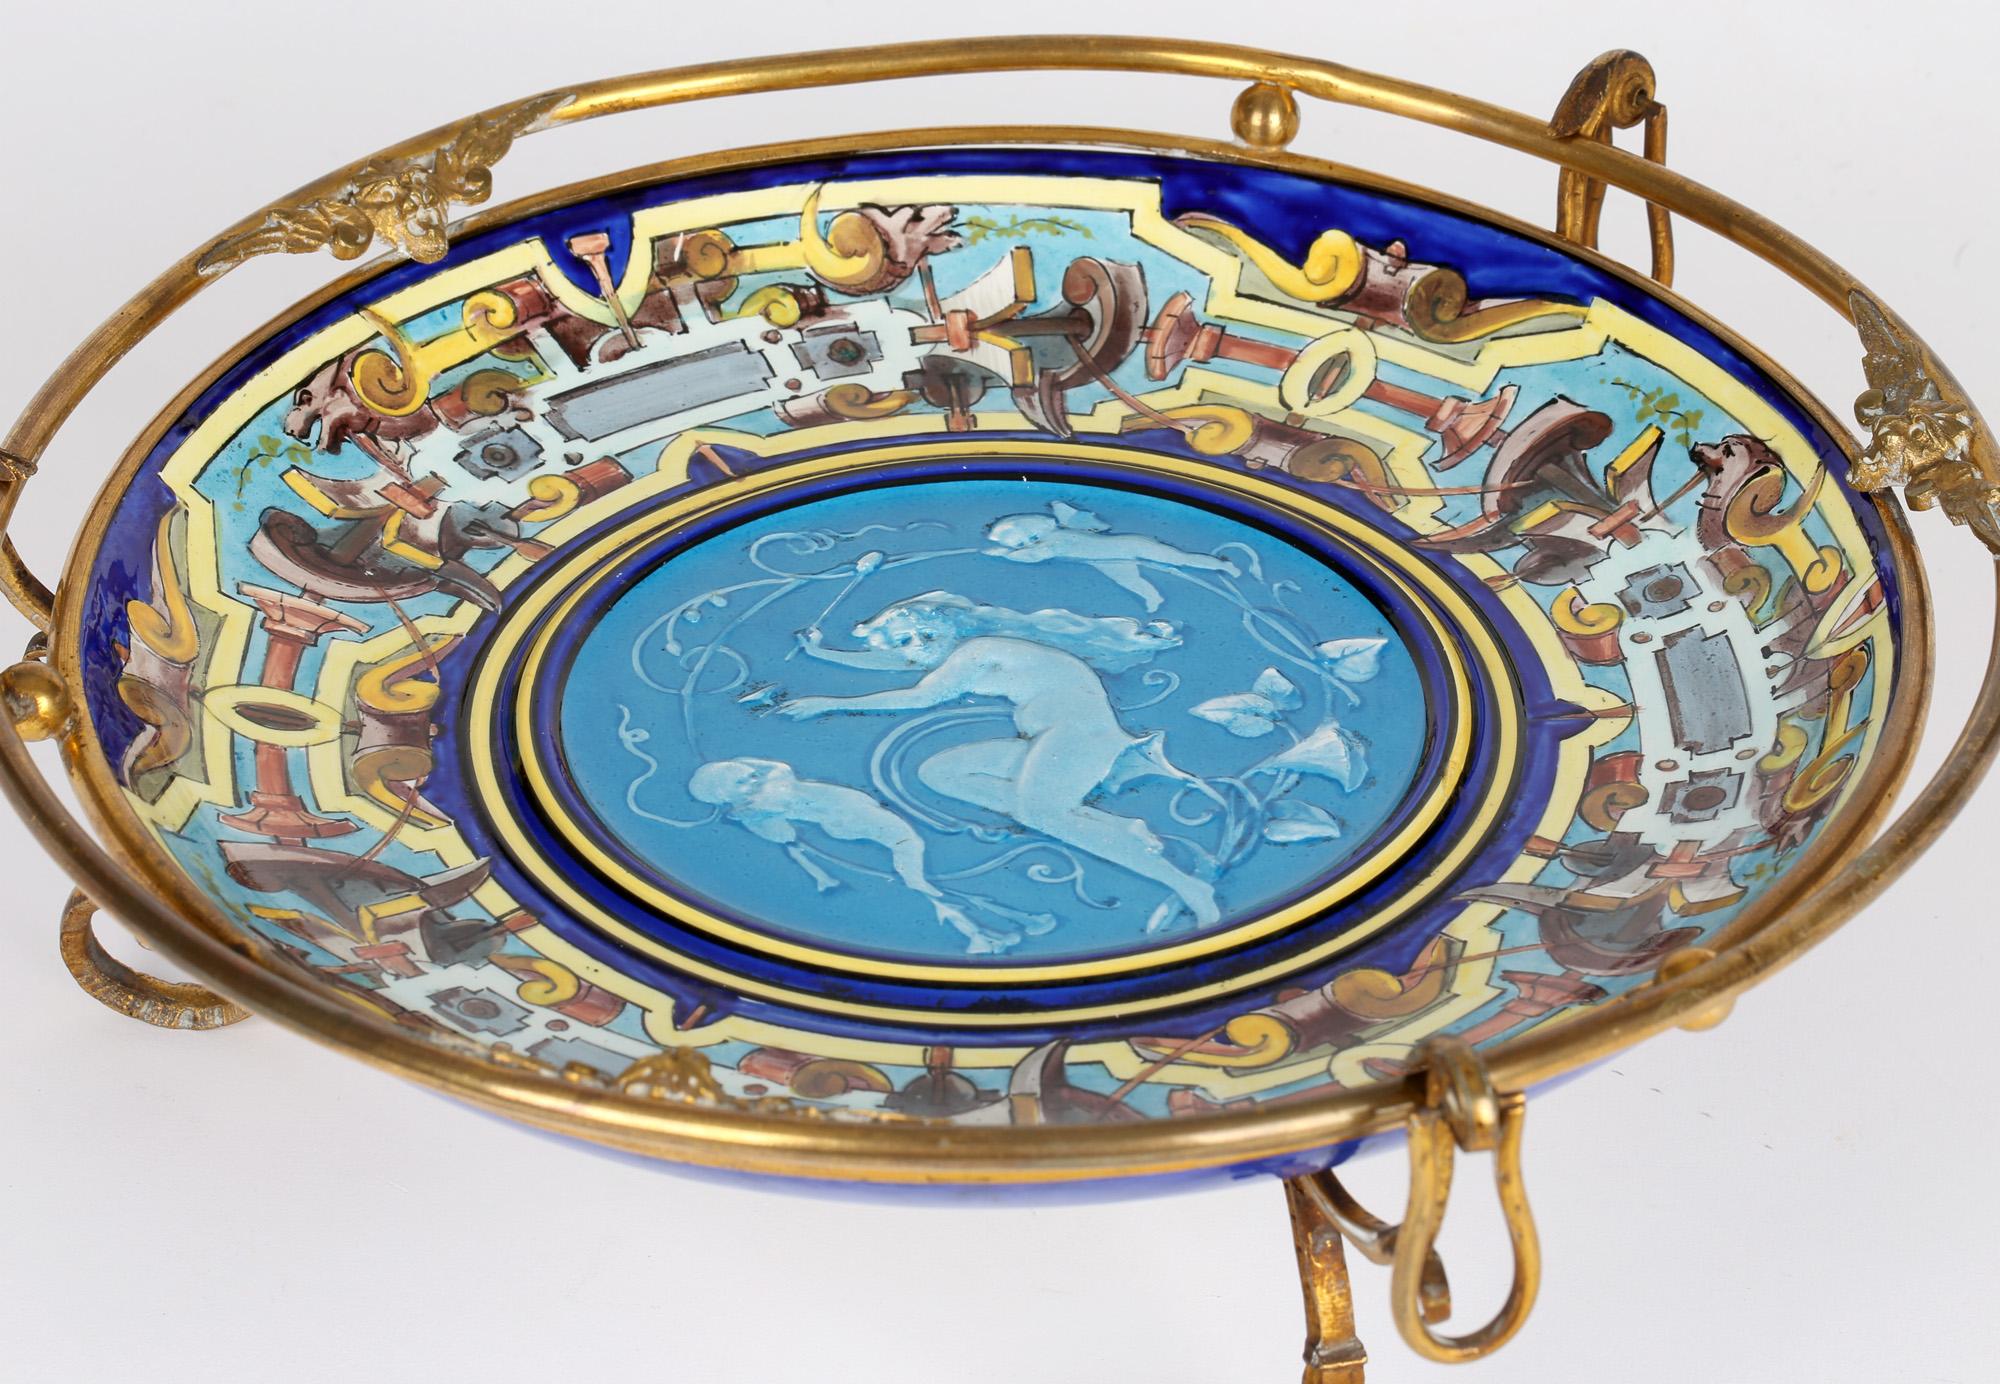 Théodore Deck Attributed French Ormolu Mounted Majolica Tazza For Sale 10